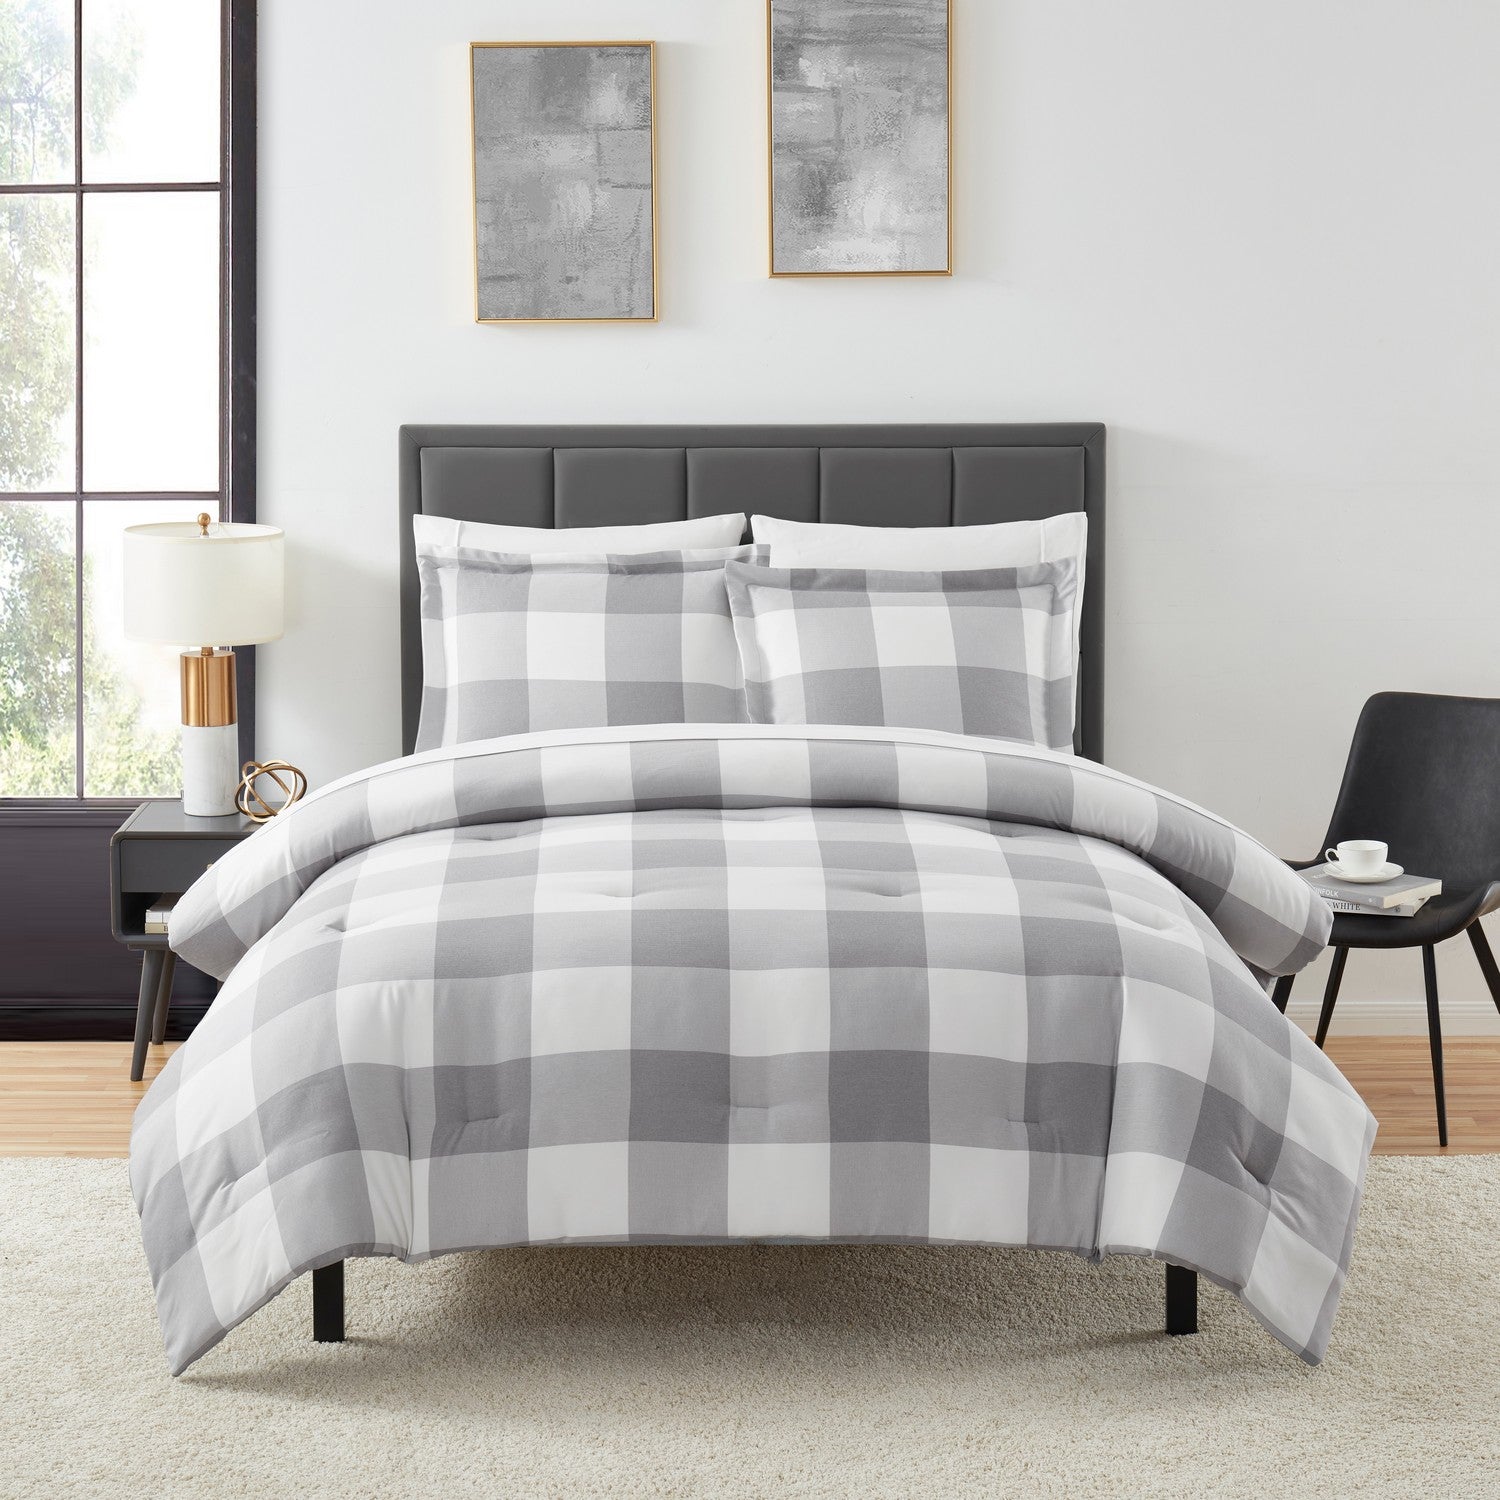 Herringbone 7-Piece Bed In A Bag Set Buffalo Check Bed